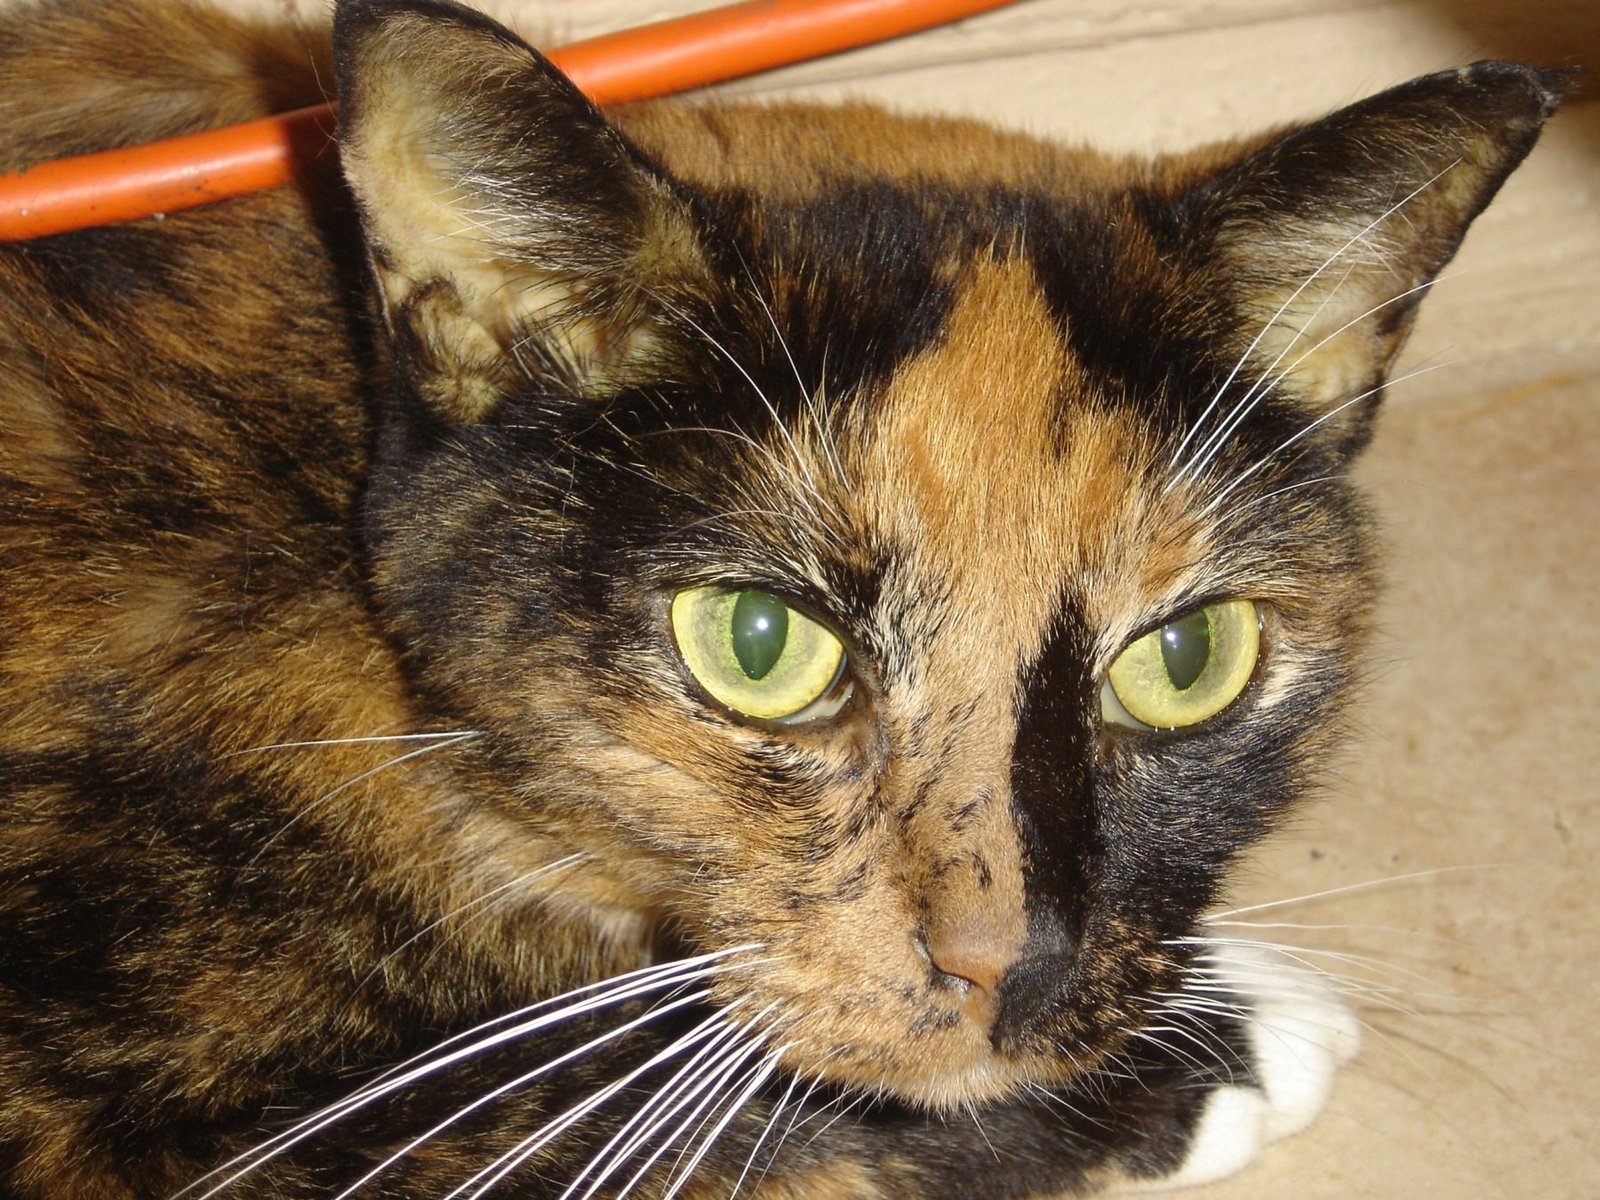 Jaundice in cats is a symptom of underlying diseases that can affect various organs